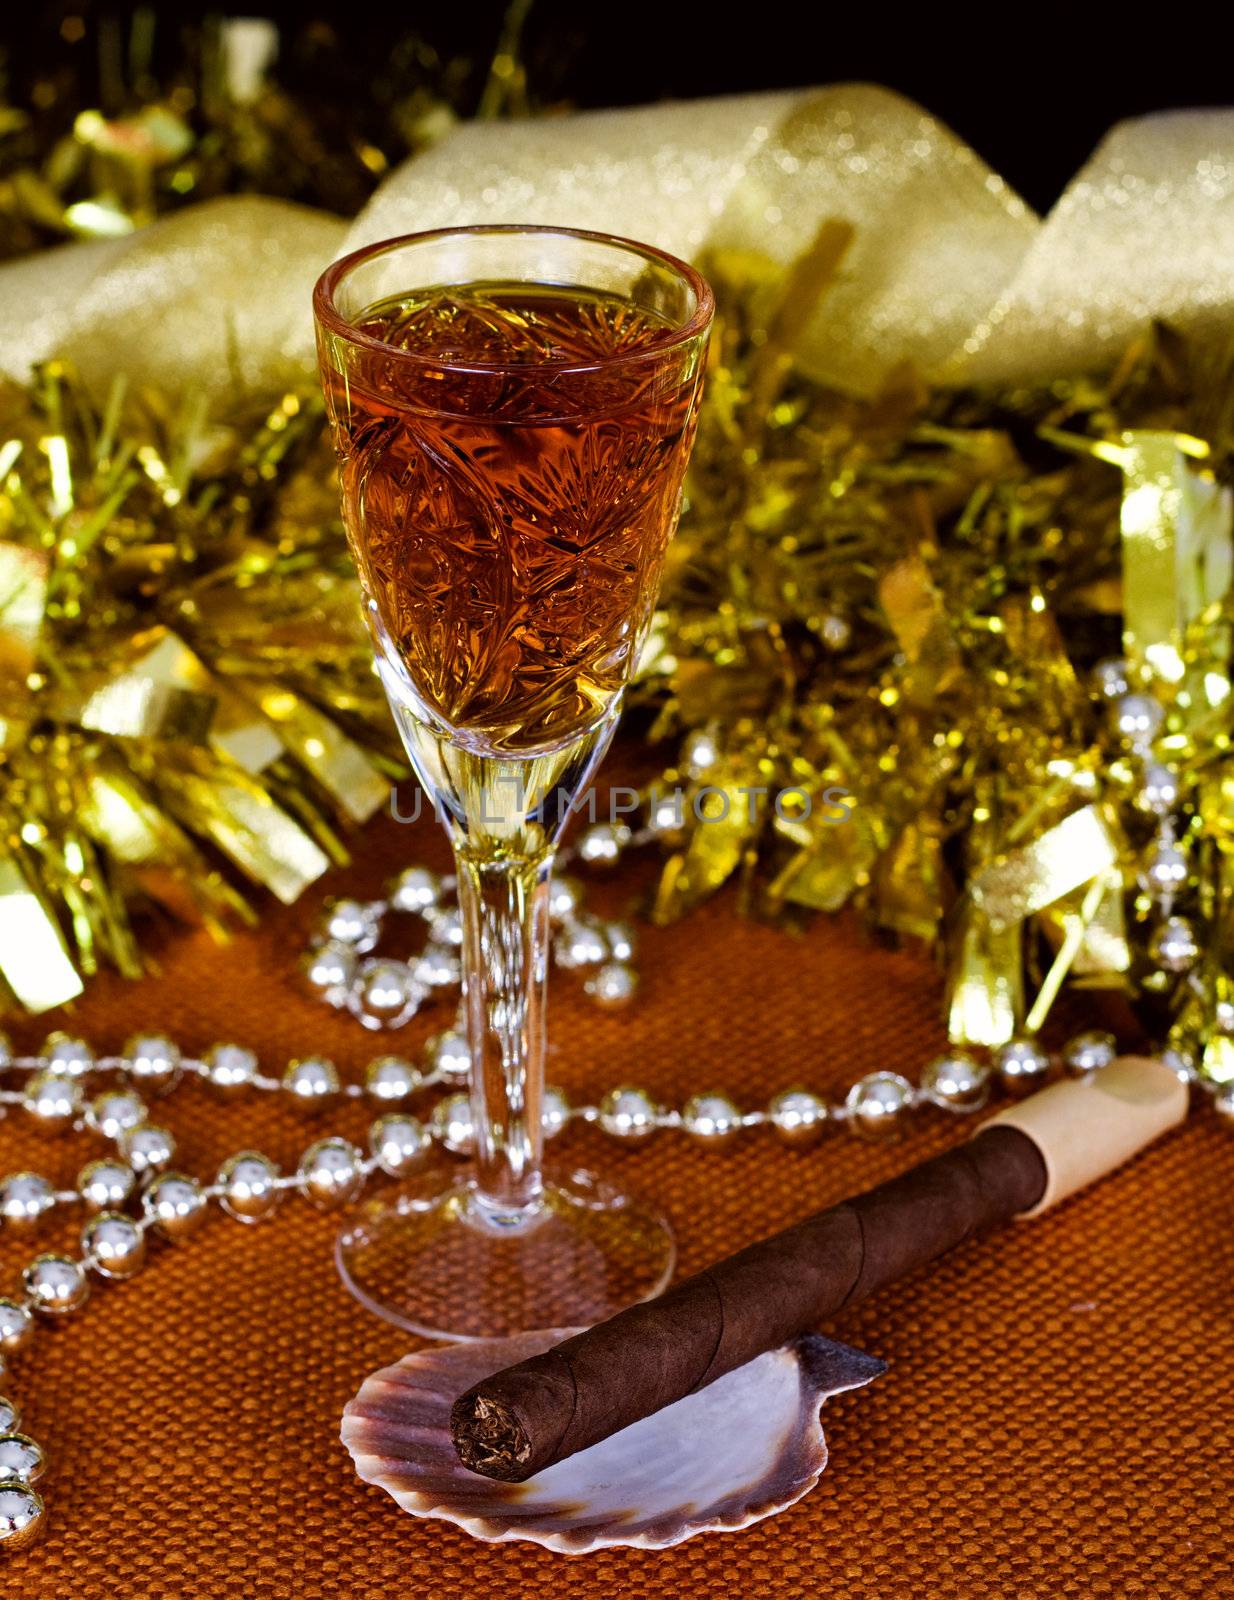 Crystal glass with brandy, cigars and Christmas decorations by Irina1977